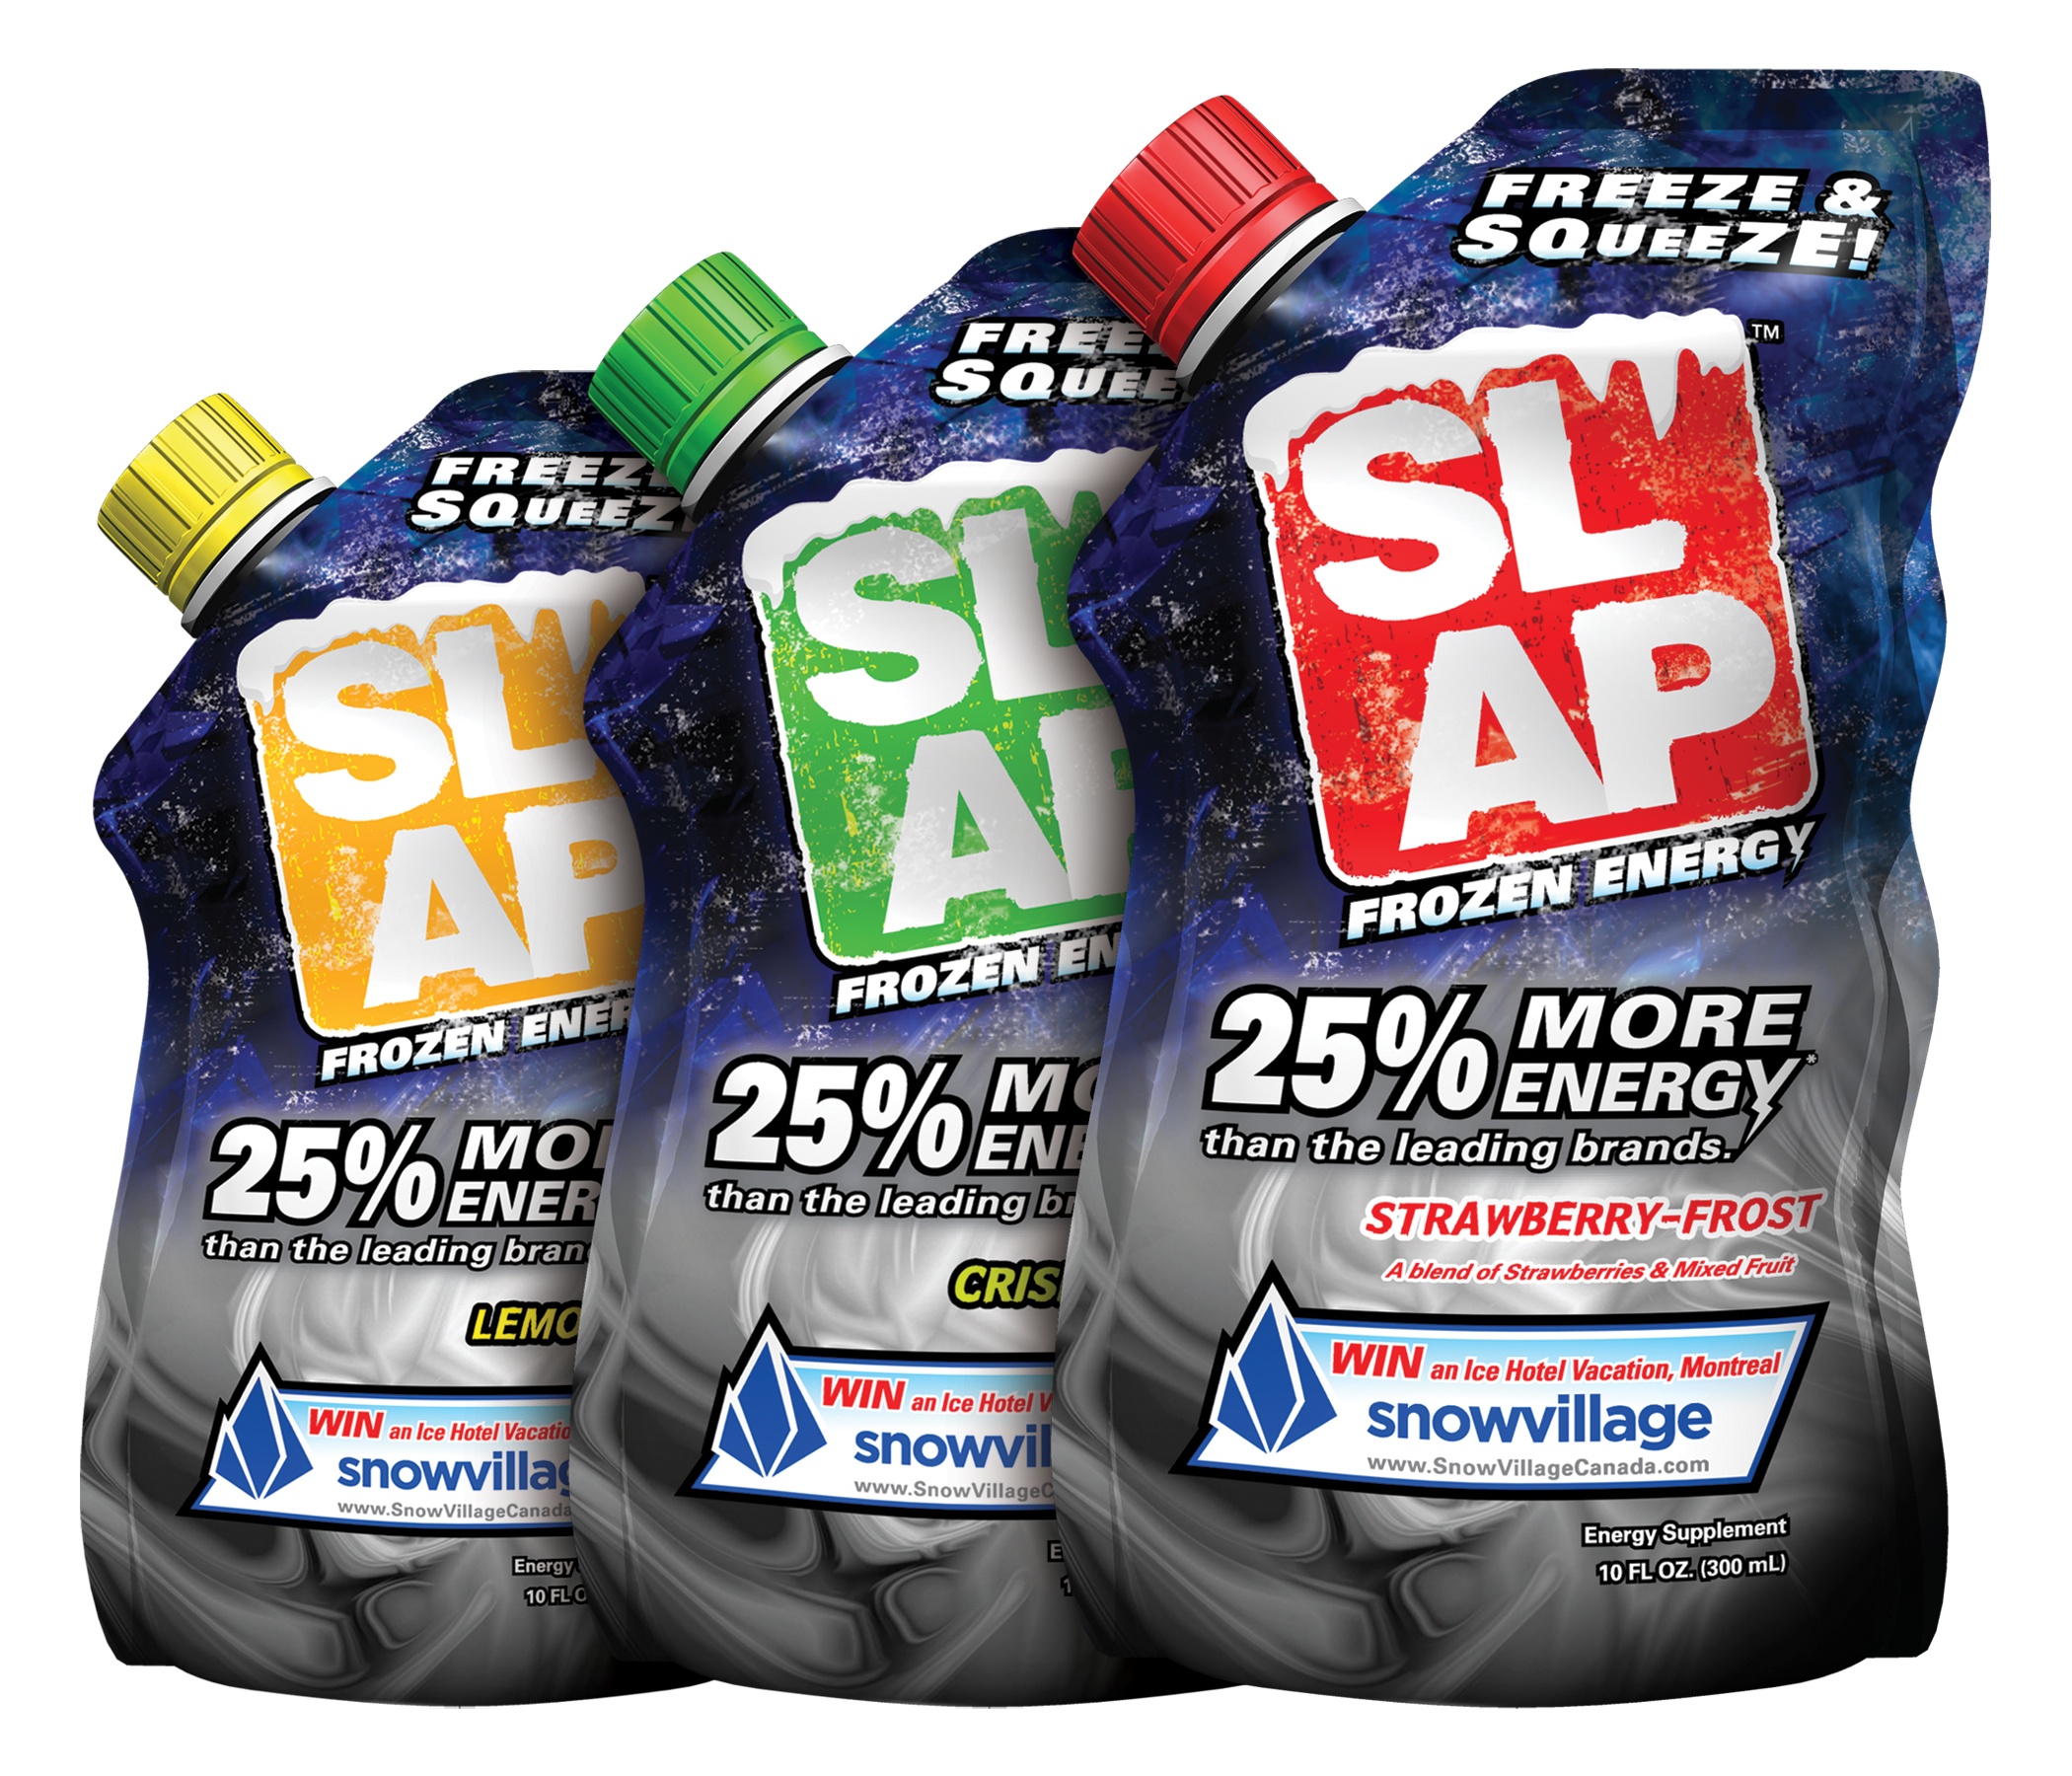 SLAP FROZEN Energy Offers Chilling Addition to Thriving Market ...